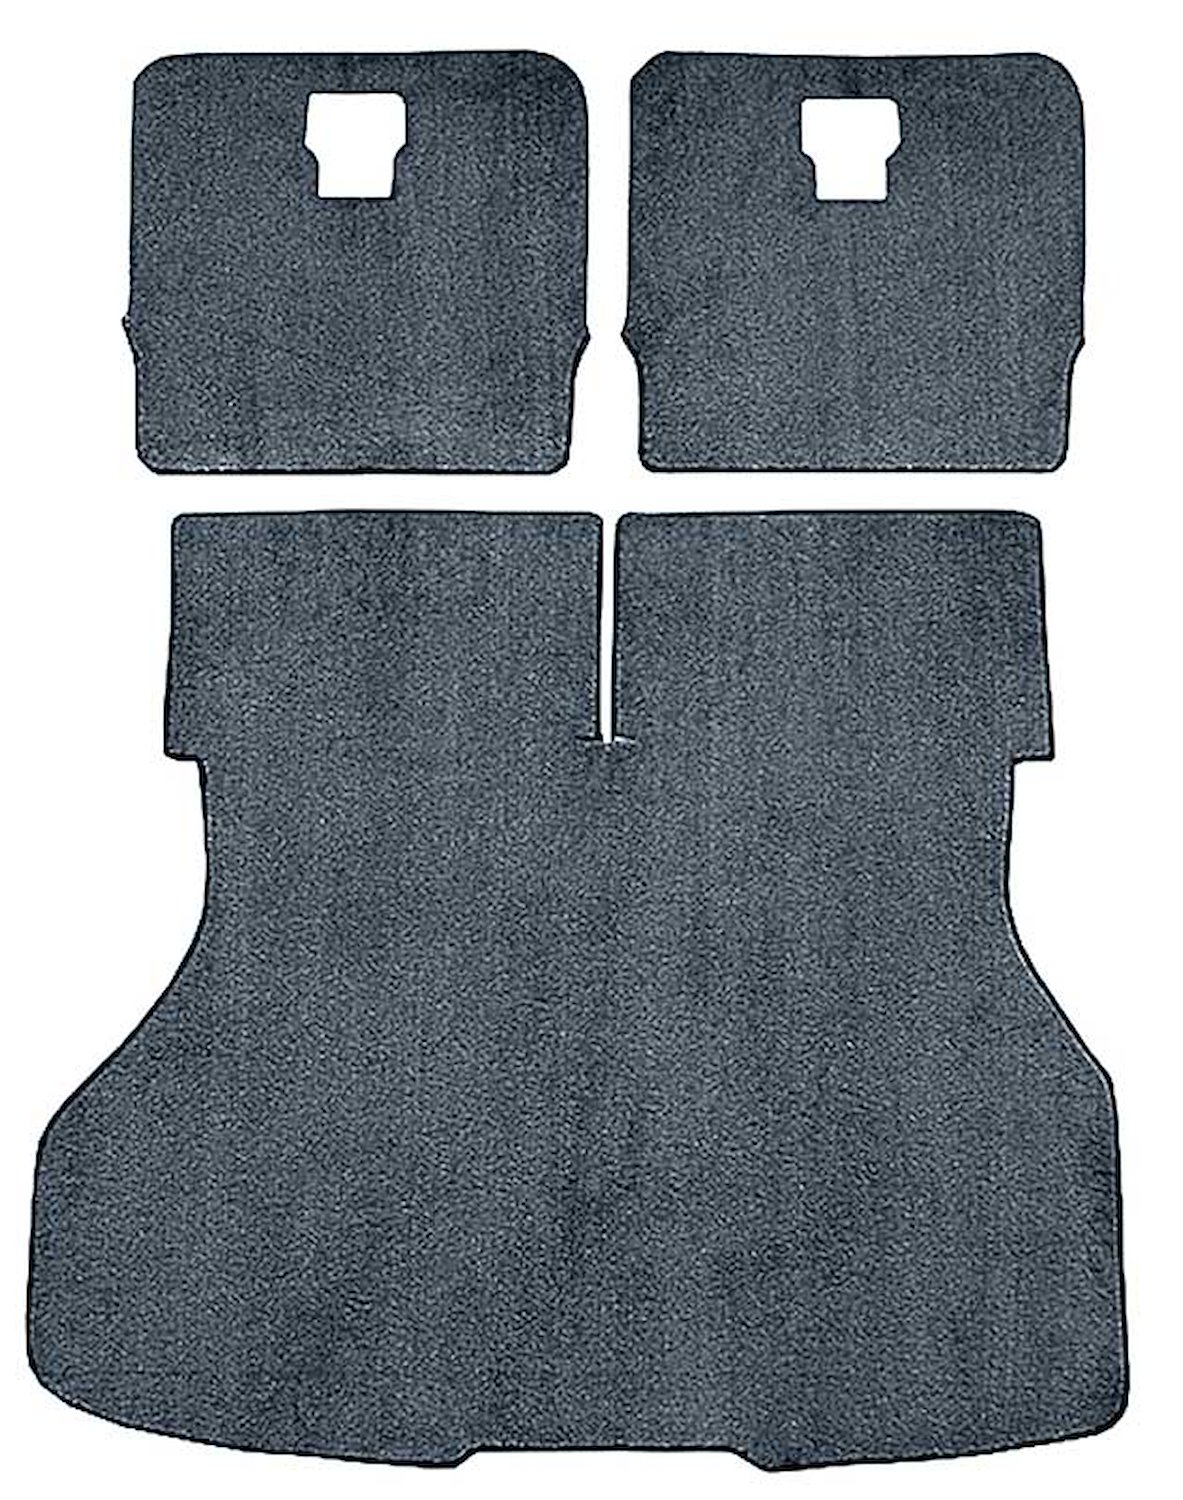 A4026B64 Rear Cargo Area Cut Pile Carpet Set With Mass Backing 1987-93 Mustang Hatchback; Steel Blue